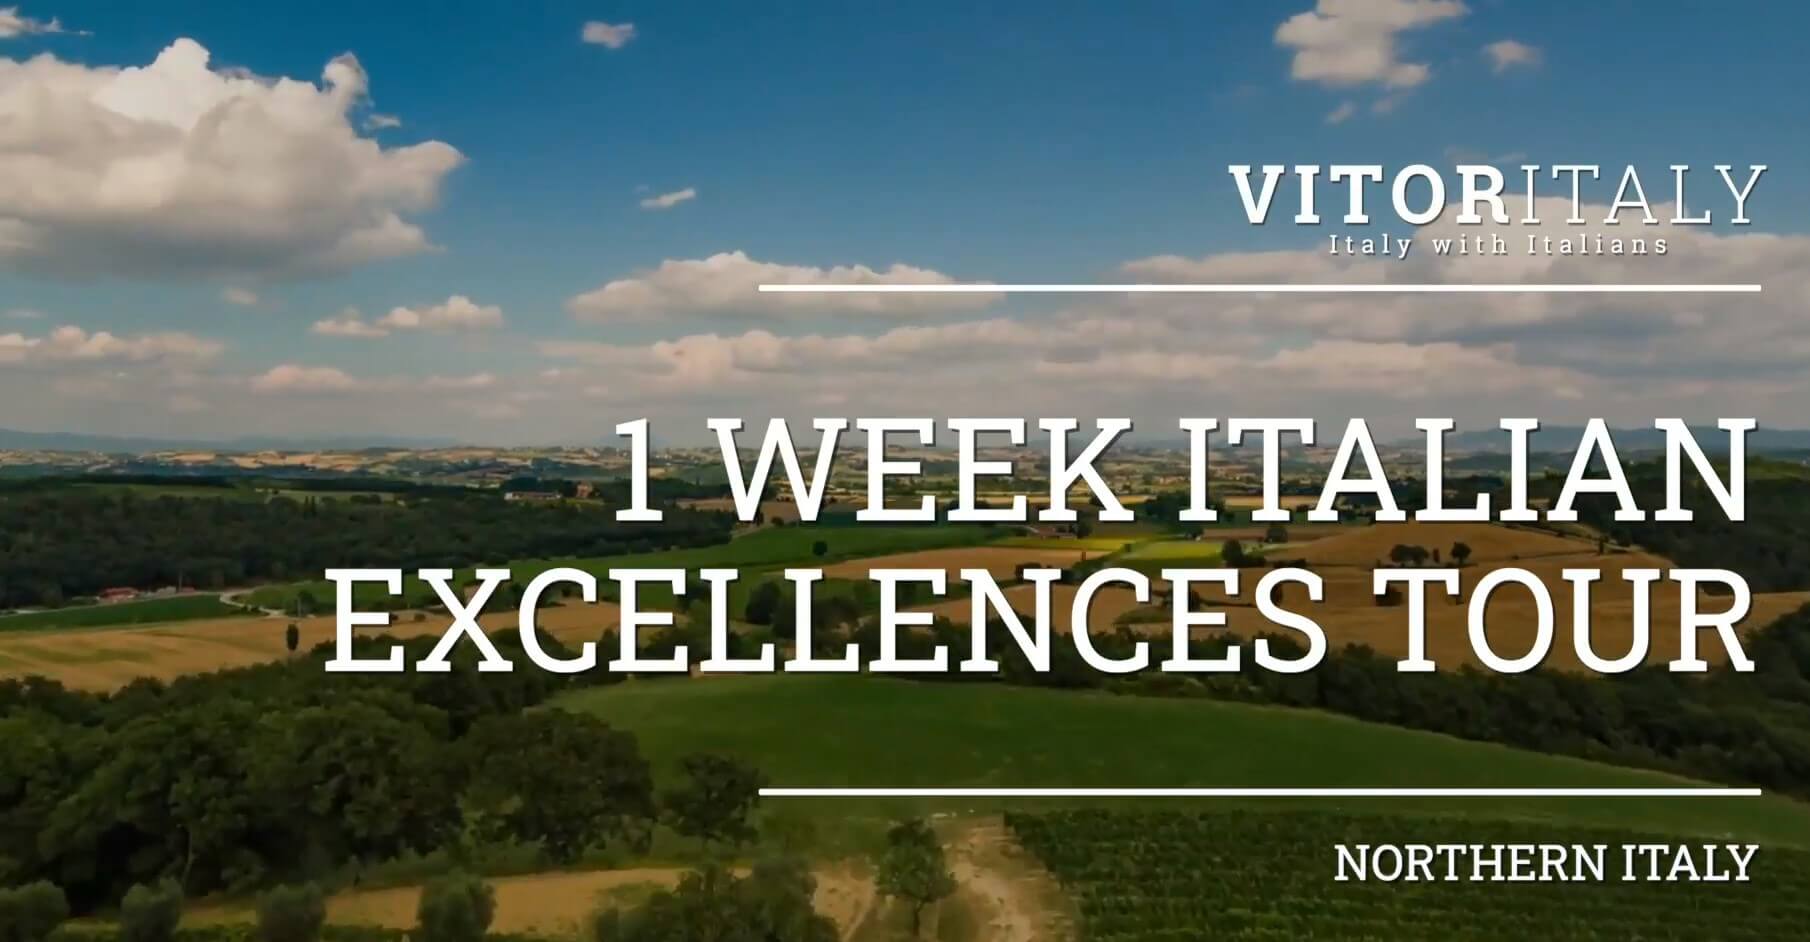 1-WEEK ITALIAN EXCELLENCES PRIVATE TOUR - NORTHERN ITALY